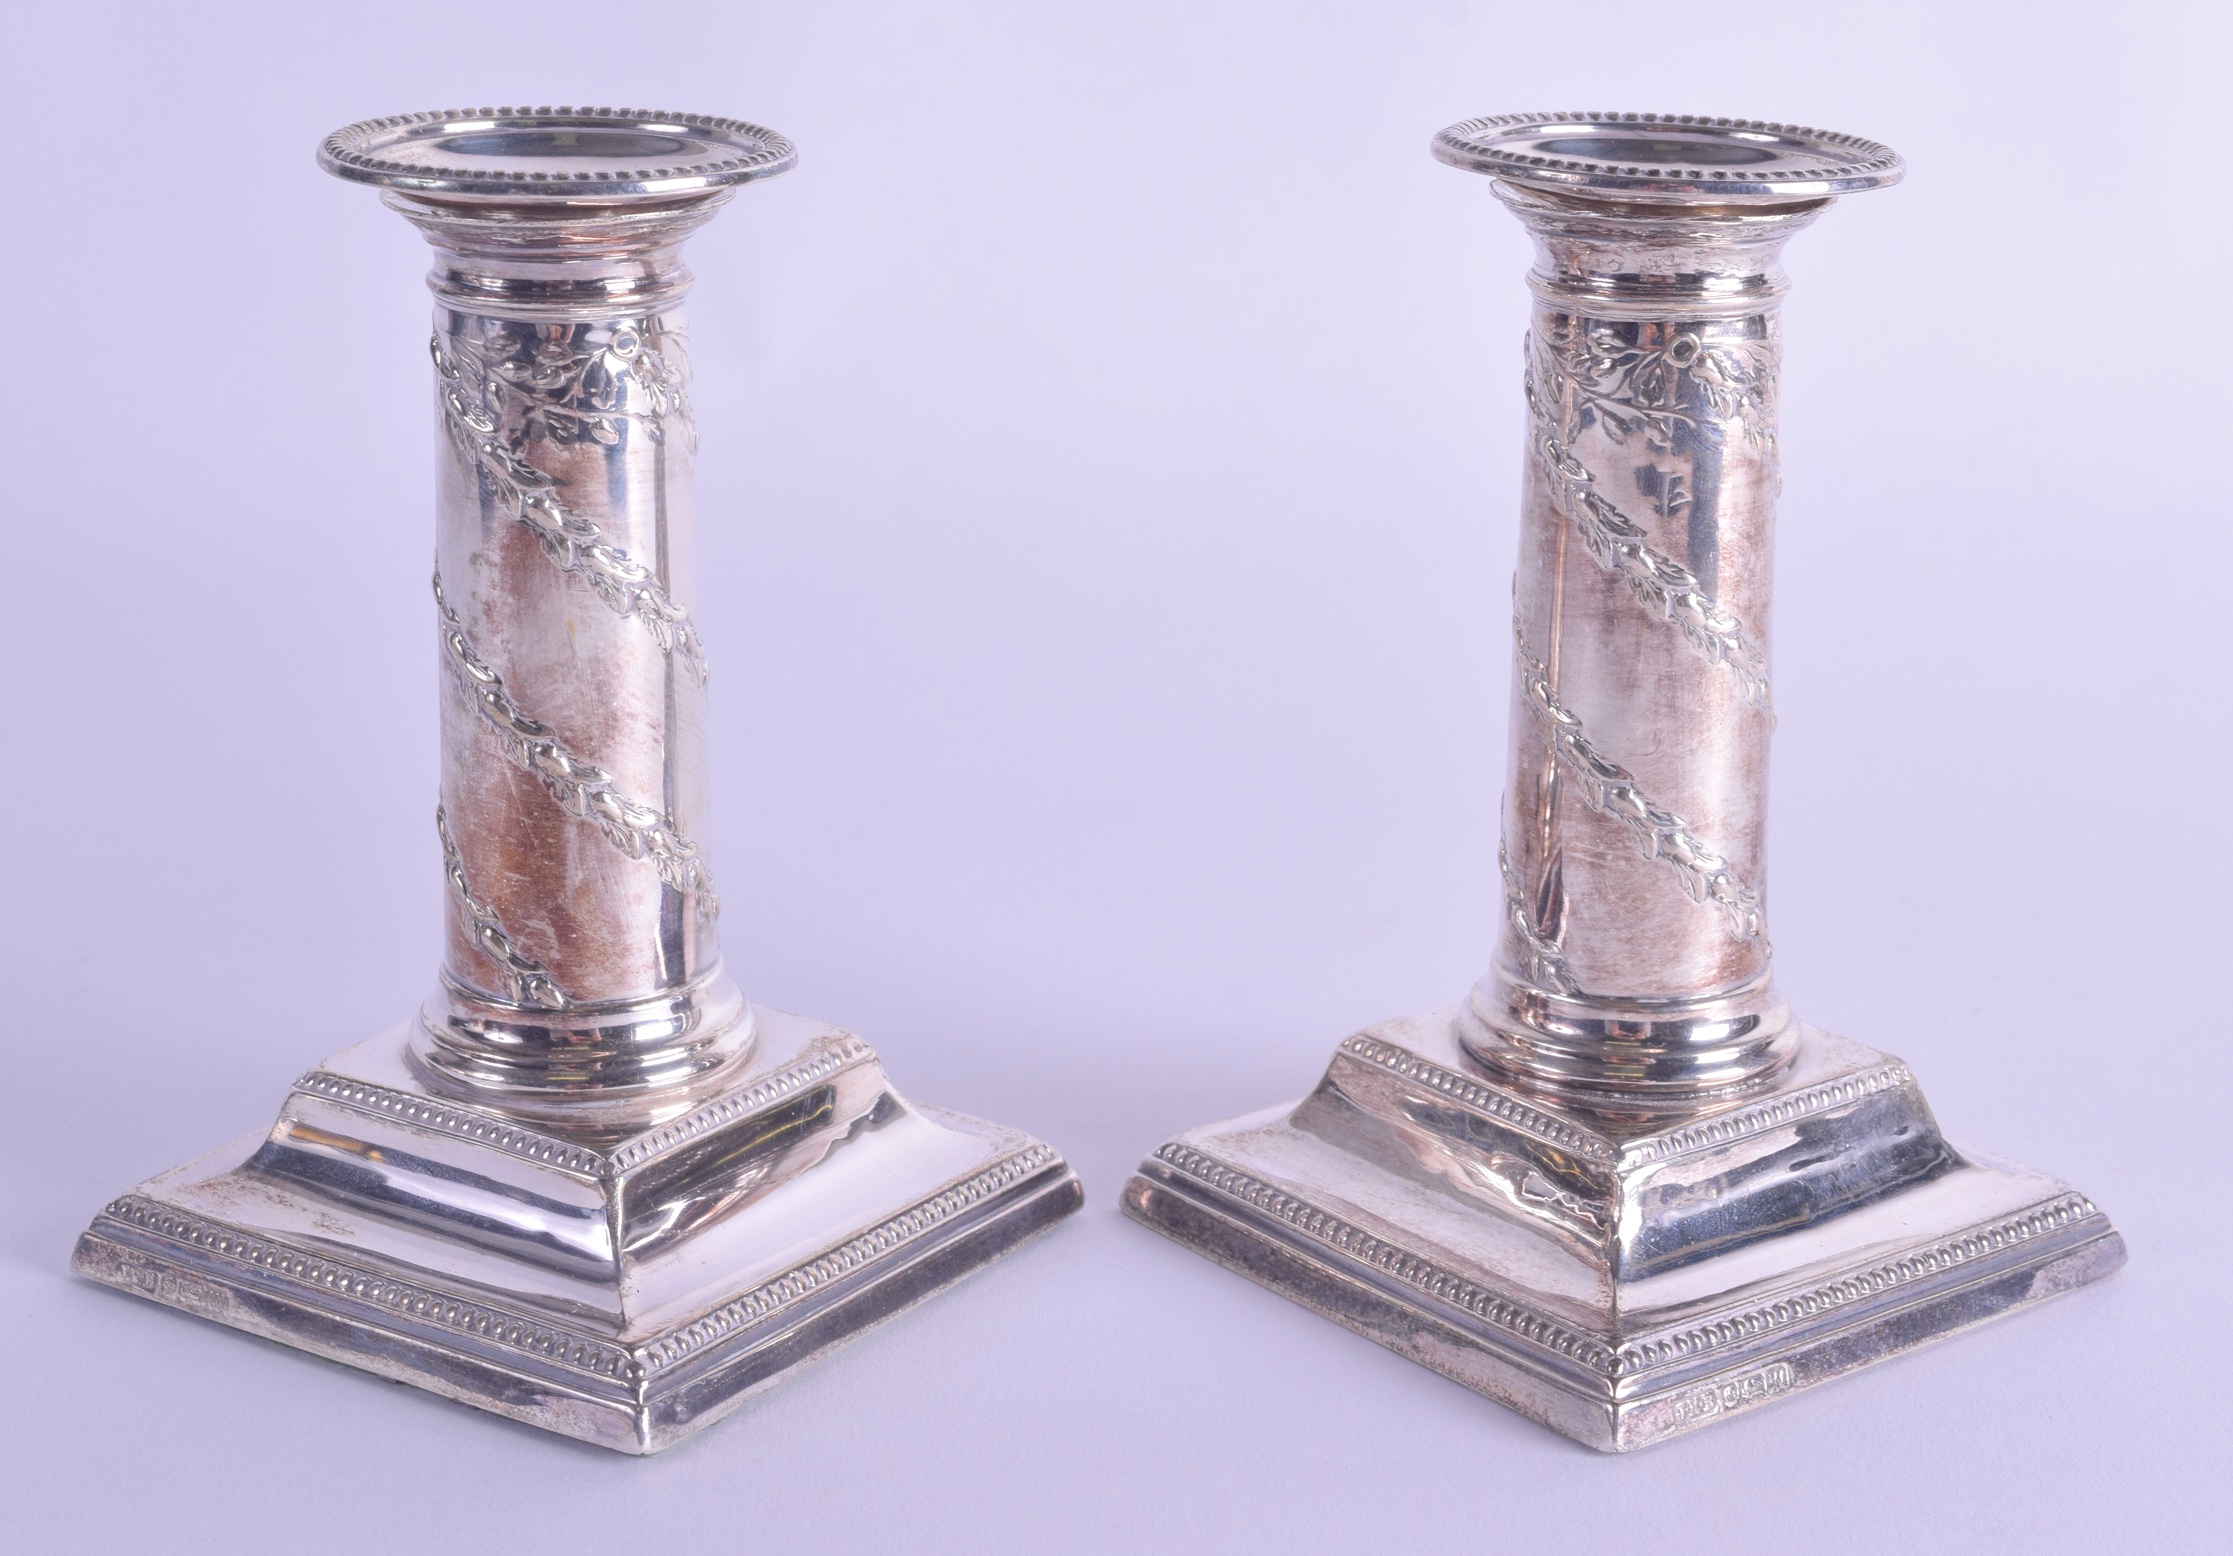 A PAIR OF 1960S ENGLISH SILVER CANDLESTICKS. Sheffield 1964. 13 cm high. - Image 2 of 3